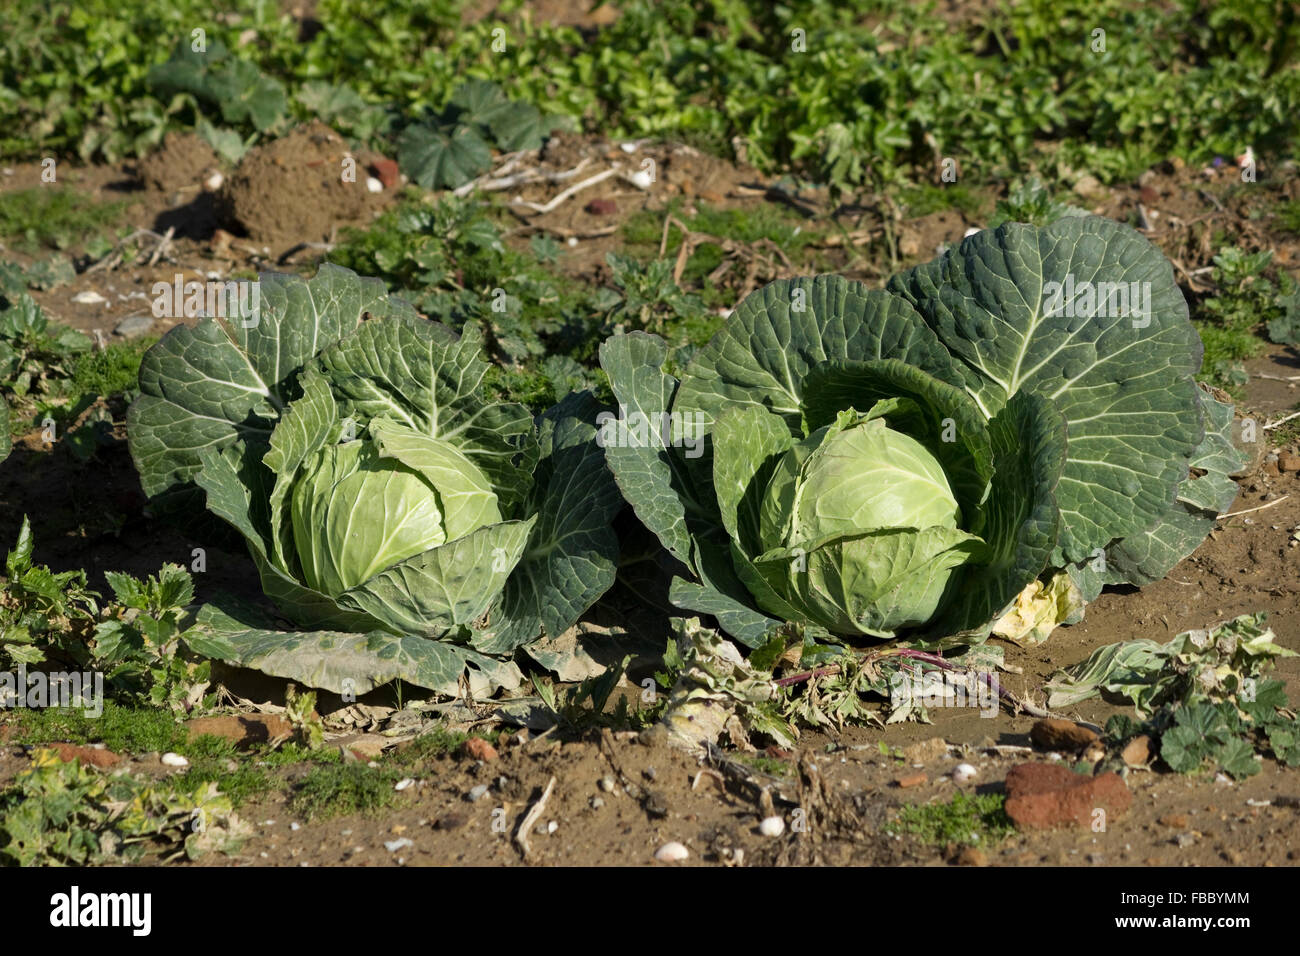 Two fresh organic white cabbages growing naturally / chemical-free / pesticide free in a farm garden. Limnos island, Greece Stock Photo